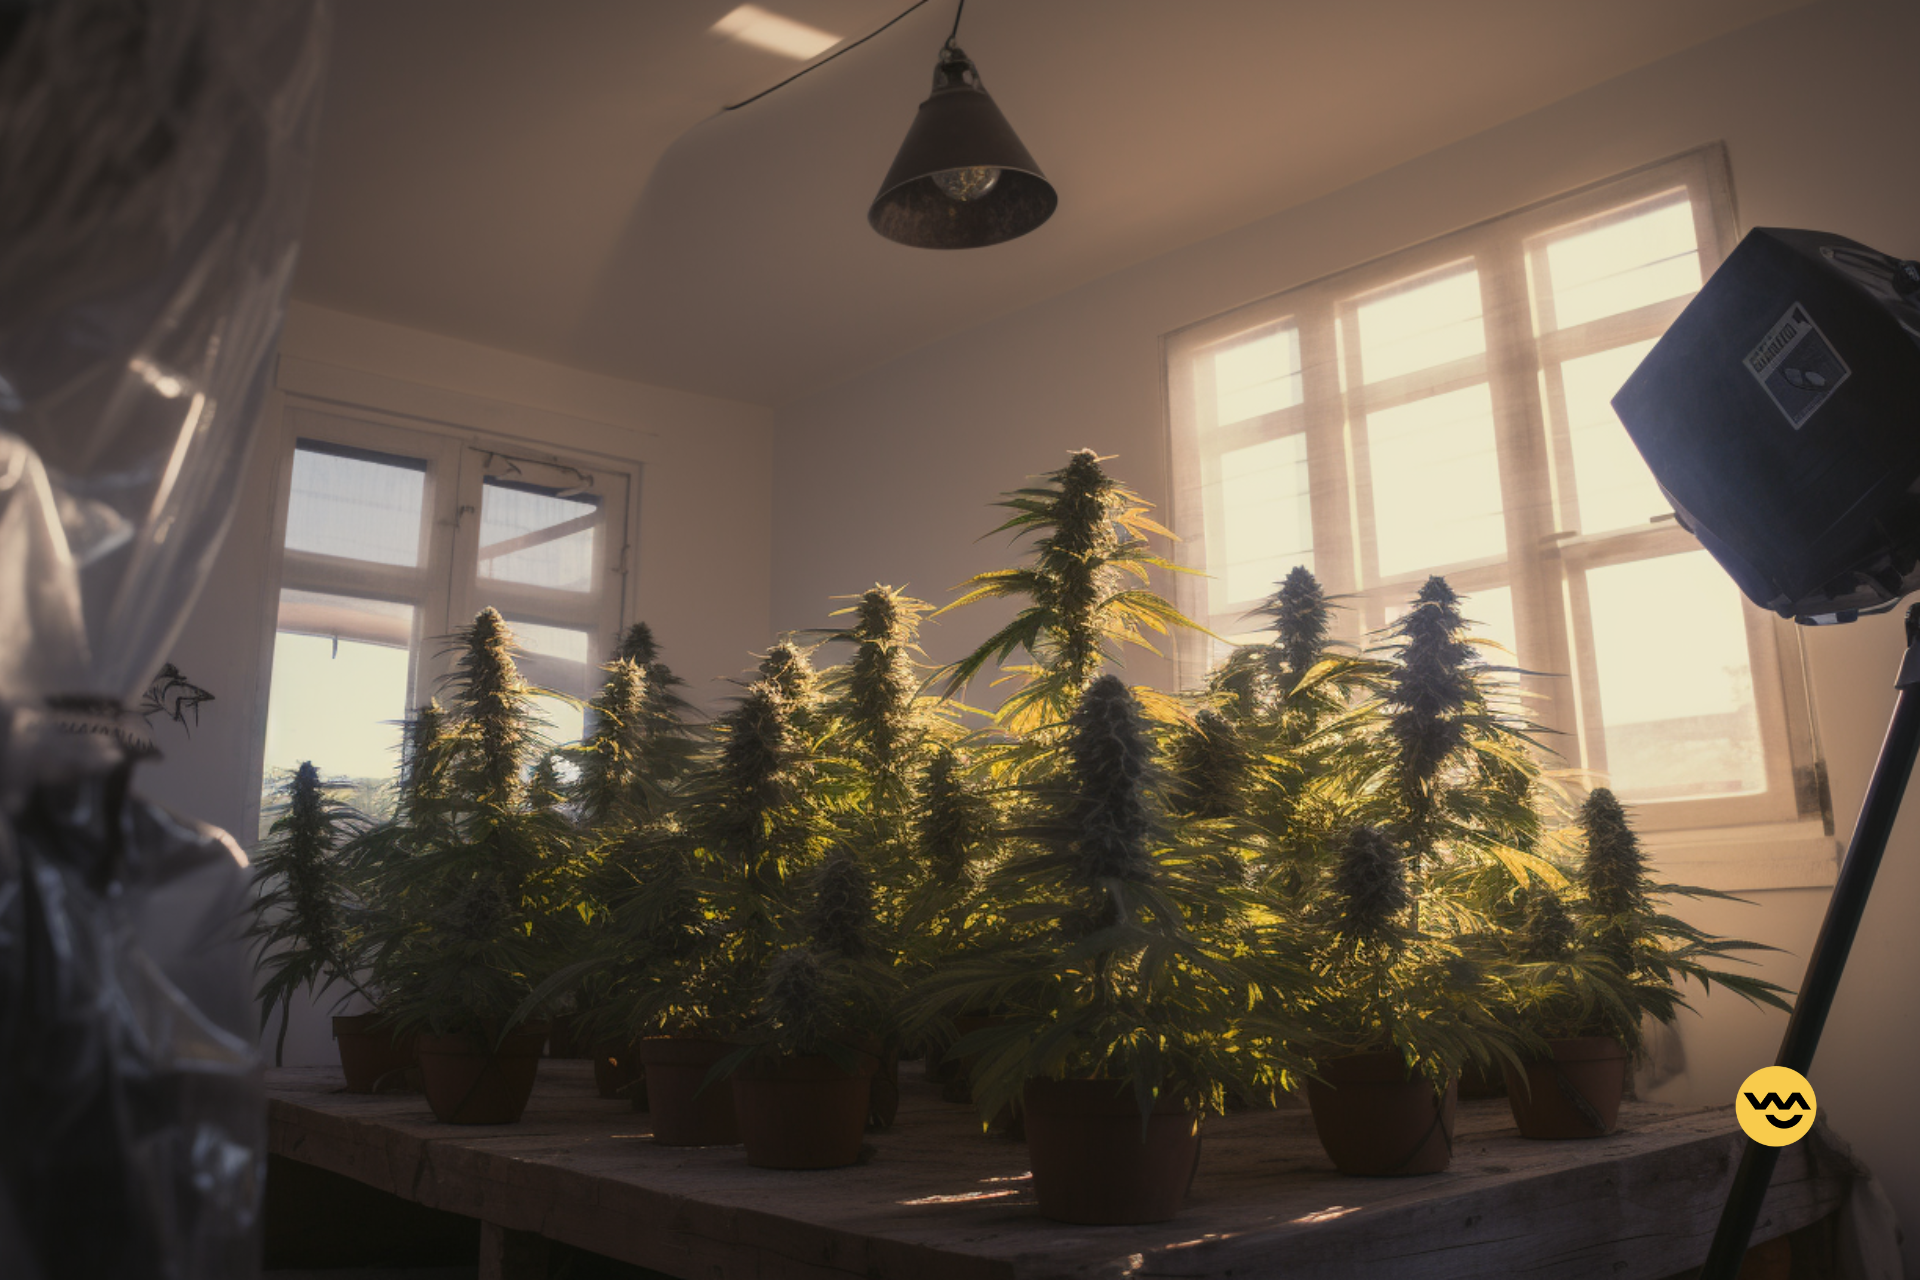 indoor cannabis cultivation